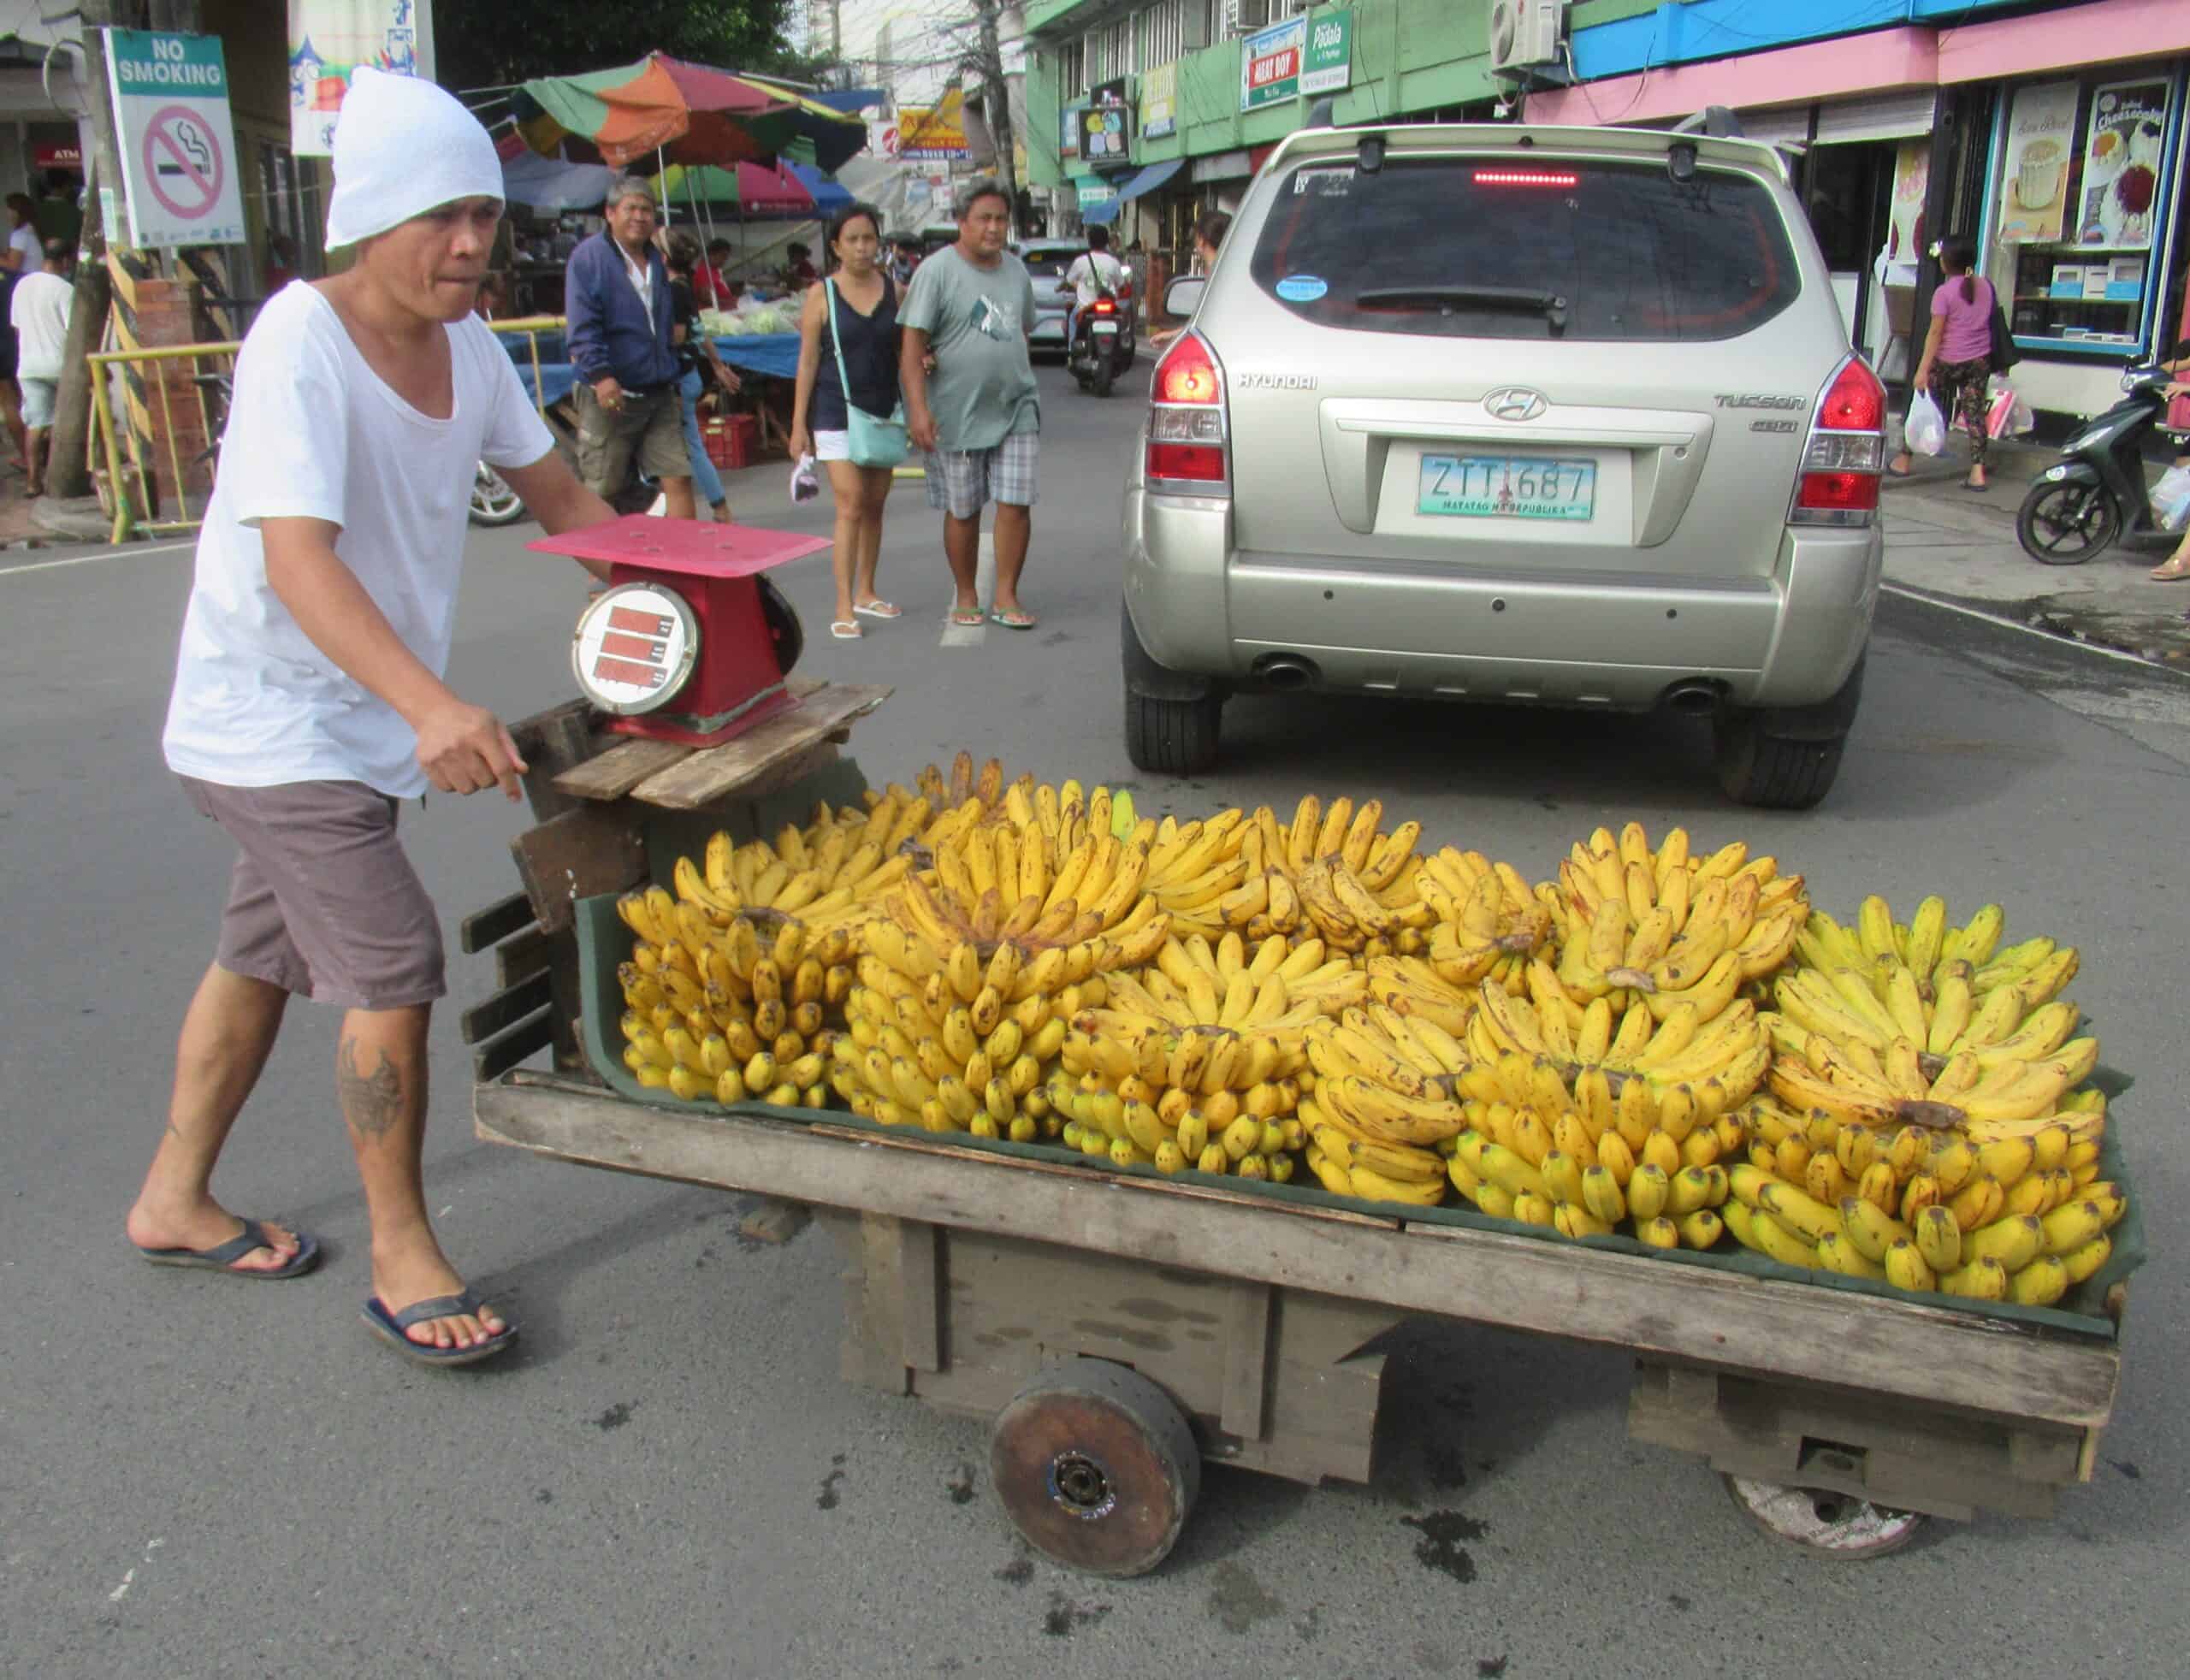 Stacks of bananas in the Philippines